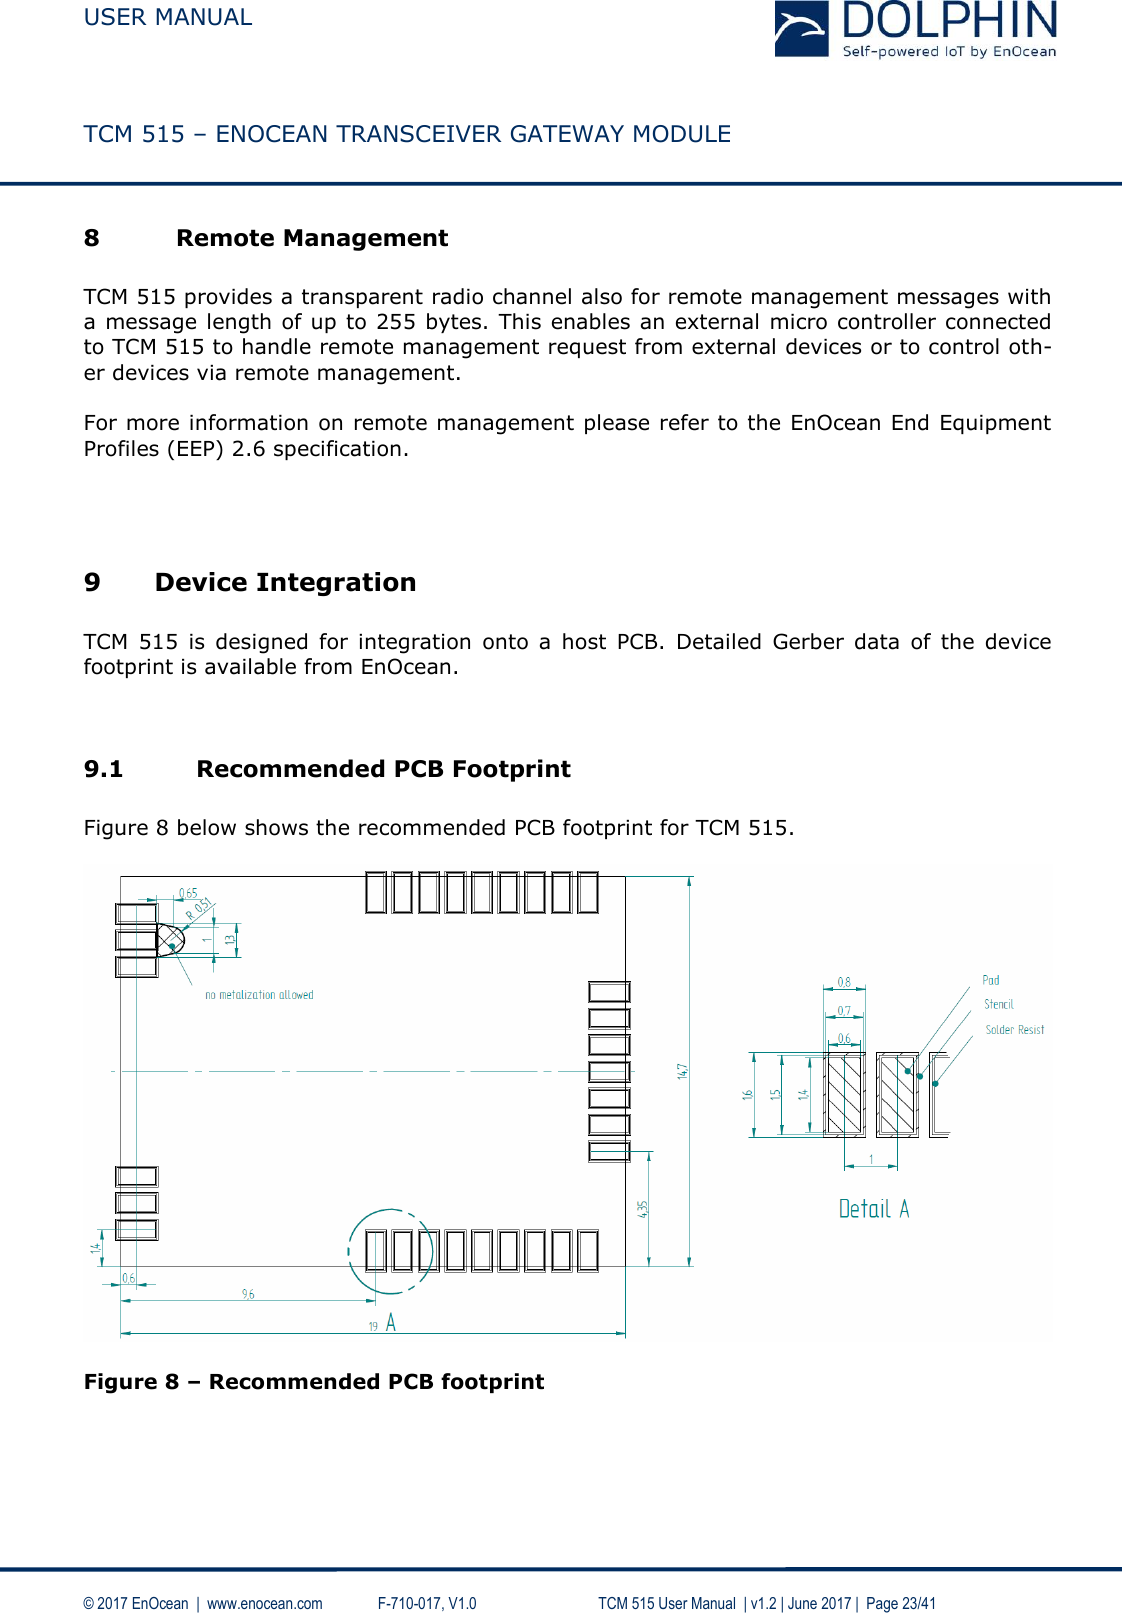  USER MANUAL    TCM 515 – ENOCEAN TRANSCEIVER GATEWAY MODULE  © 2017 EnOcean  |  www.enocean.com   F-710-017, V1.0        TCM 515 User Manual  | v1.2 | June 2017 |  Page 23/41  8 Remote Management  TCM 515 provides a transparent radio channel also for remote management messages with a message length of up to 255 bytes. This enables an external micro controller connected to TCM 515 to handle remote management request from external devices or to control oth-er devices via remote management.   For more information on remote management please refer to the EnOcean End Equipment Profiles (EEP) 2.6 specification.     9 Device Integration  TCM  515  is  designed  for  integration  onto  a  host  PCB.  Detailed  Gerber  data  of  the  device footprint is available from EnOcean.    9.1 Recommended PCB Footprint  Figure 8 below shows the recommended PCB footprint for TCM 515.     Figure 8 – Recommended PCB footprint    